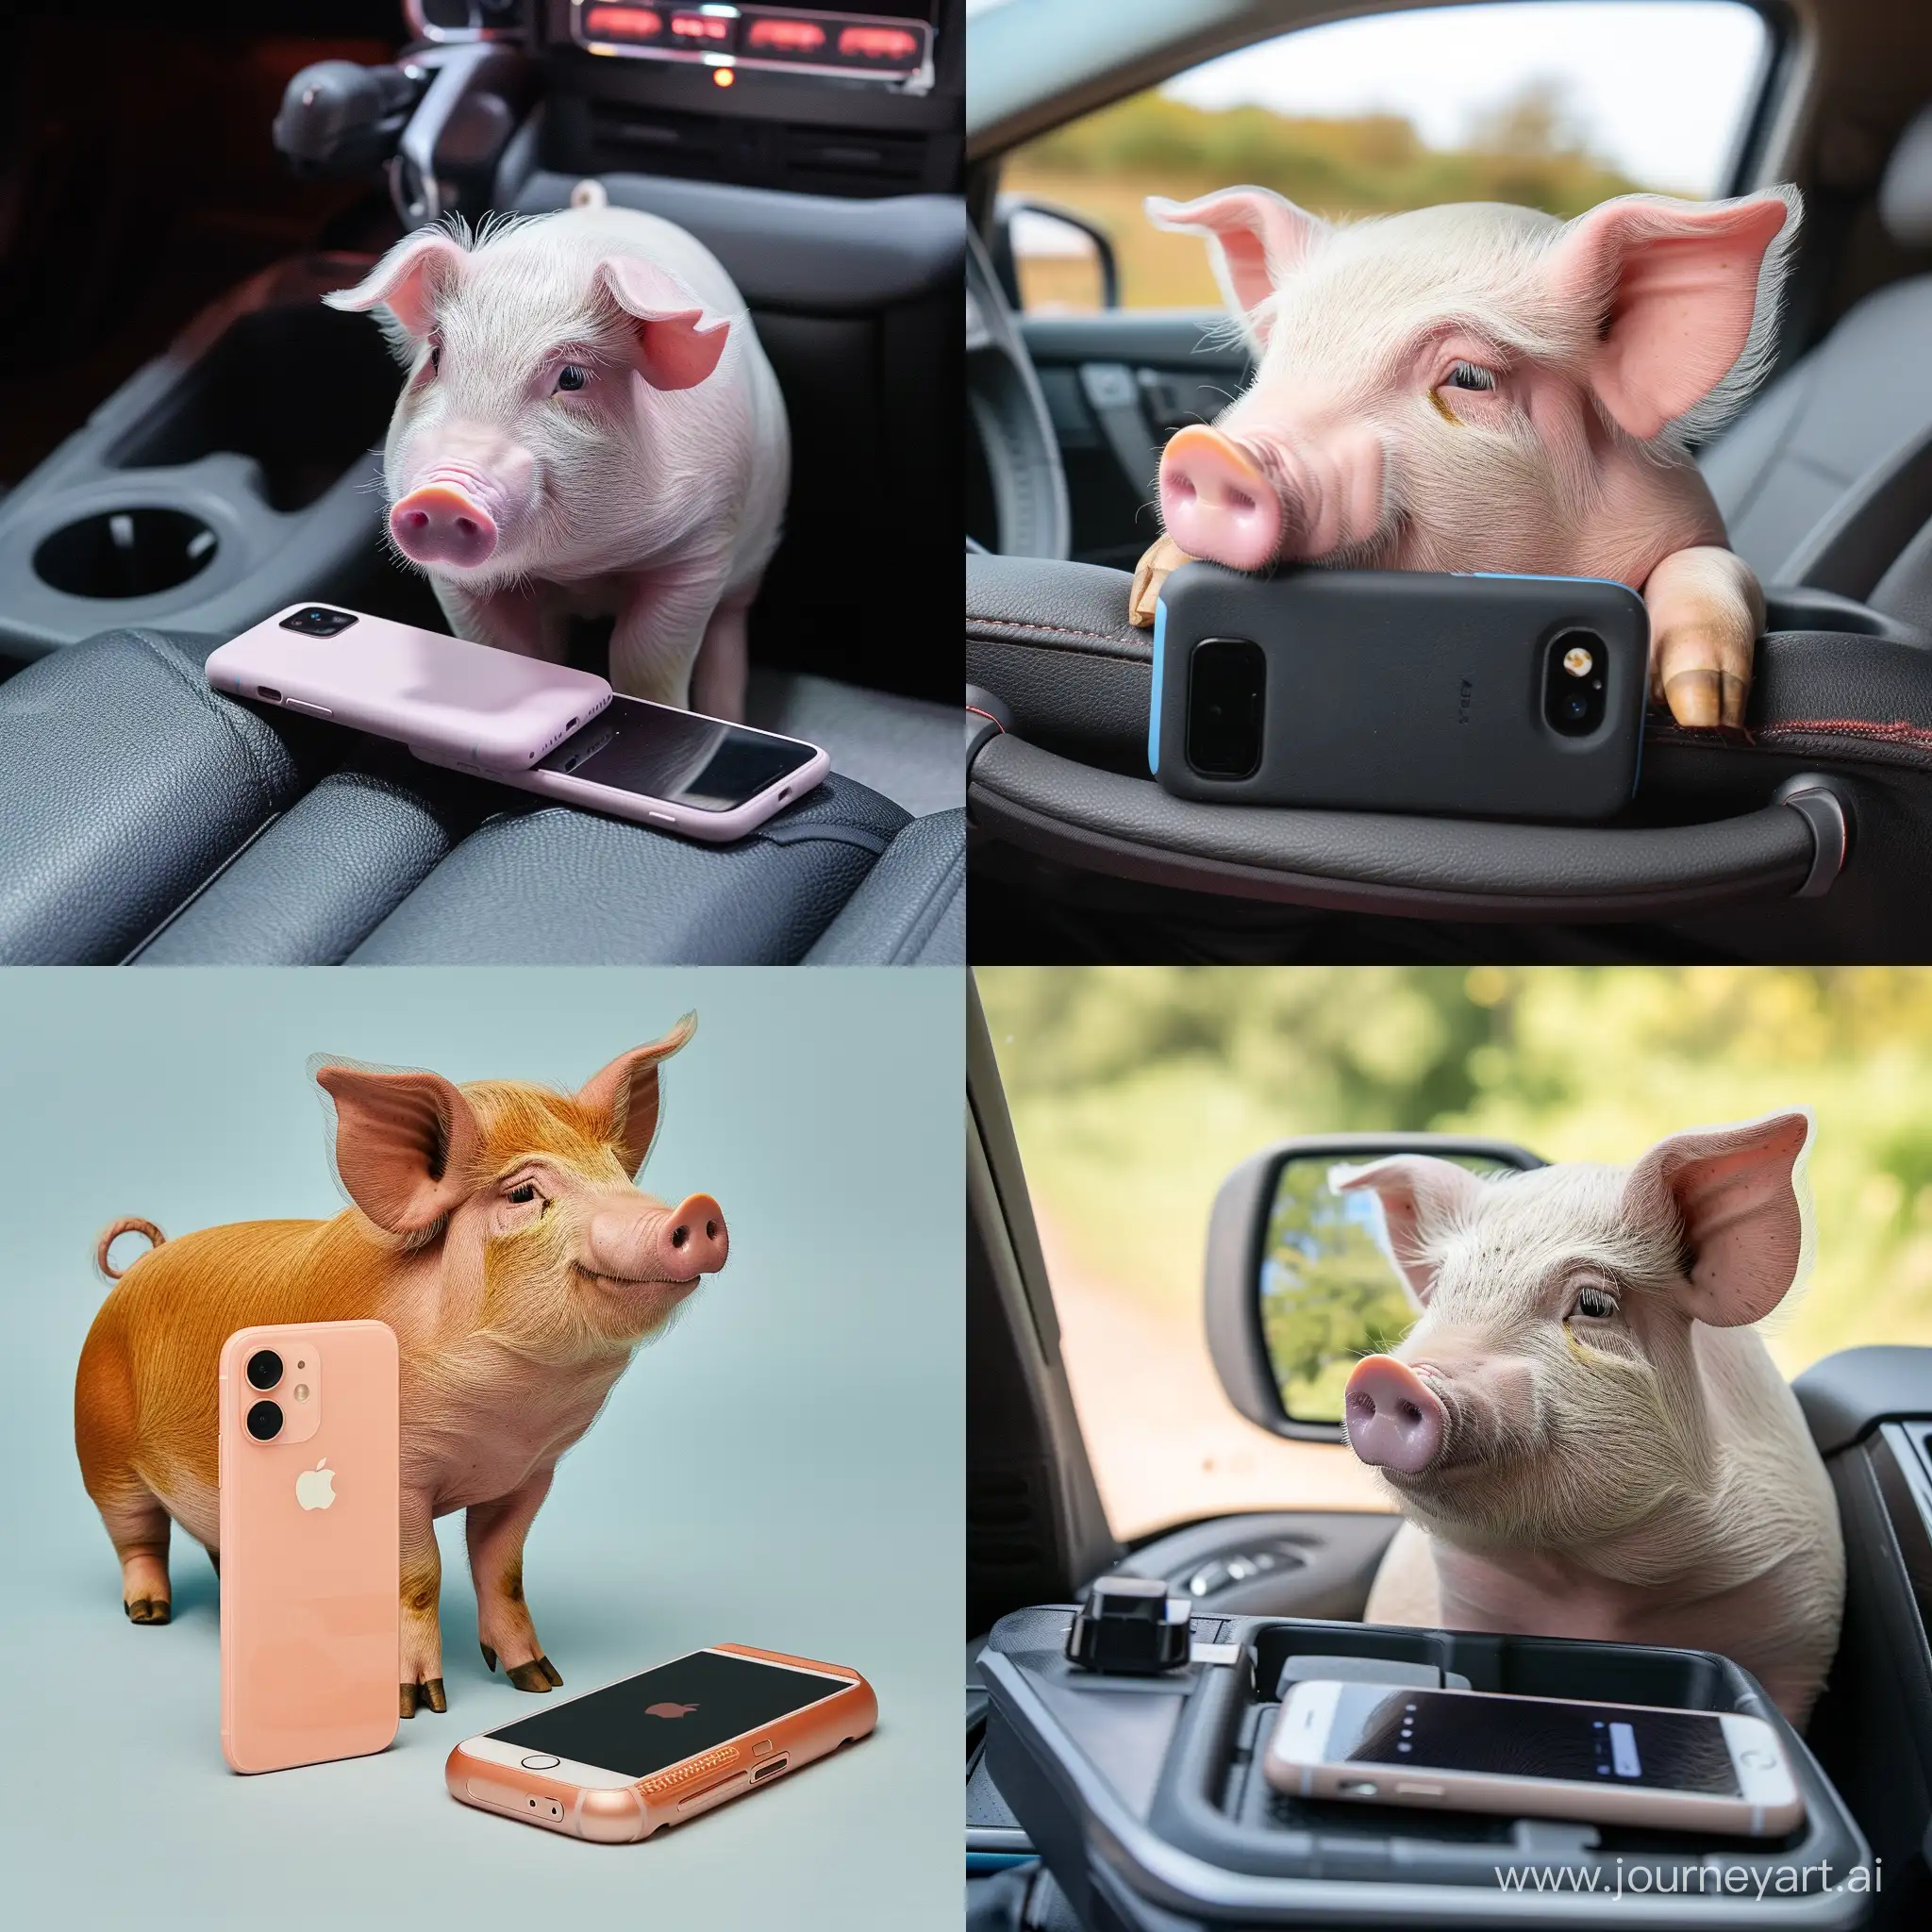 SmartphoneControlled-Car-and-Pig-with-iQOS-and-iPhone